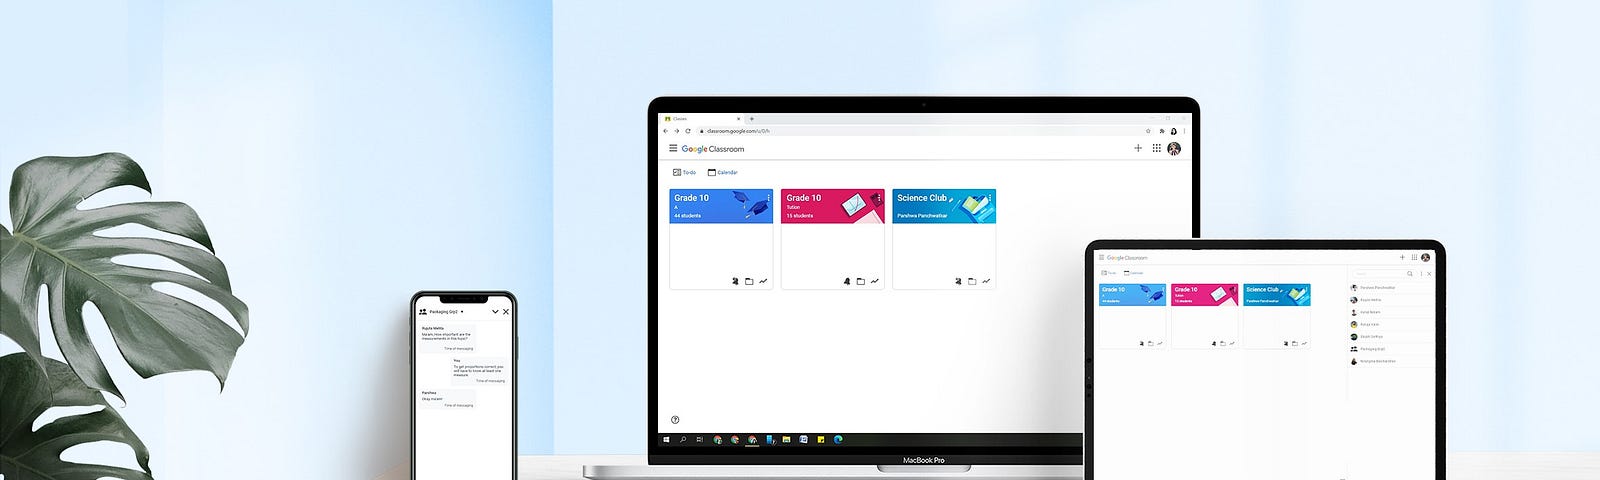 Redesigned interface of google classroom